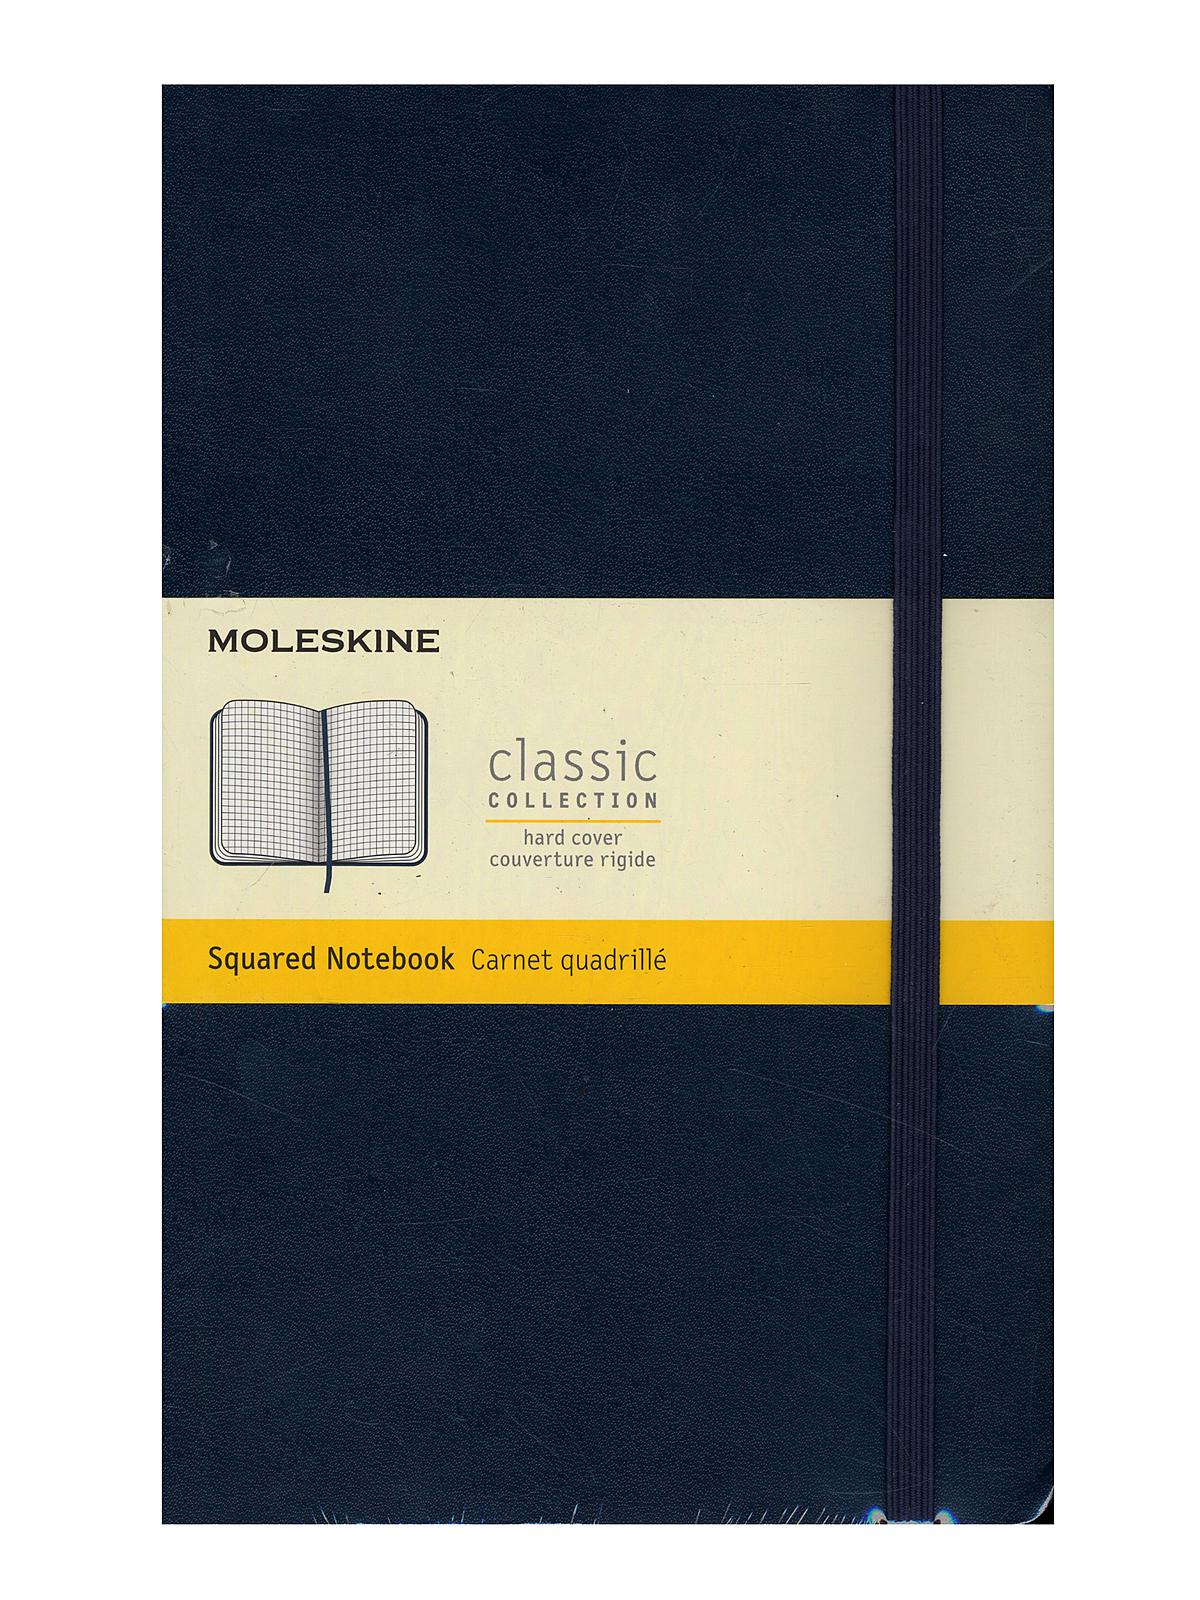 Classic Hard Cover Notebooks Sapphire Blue 5 In. X 8 1 4 In. 240 Pages, Squared